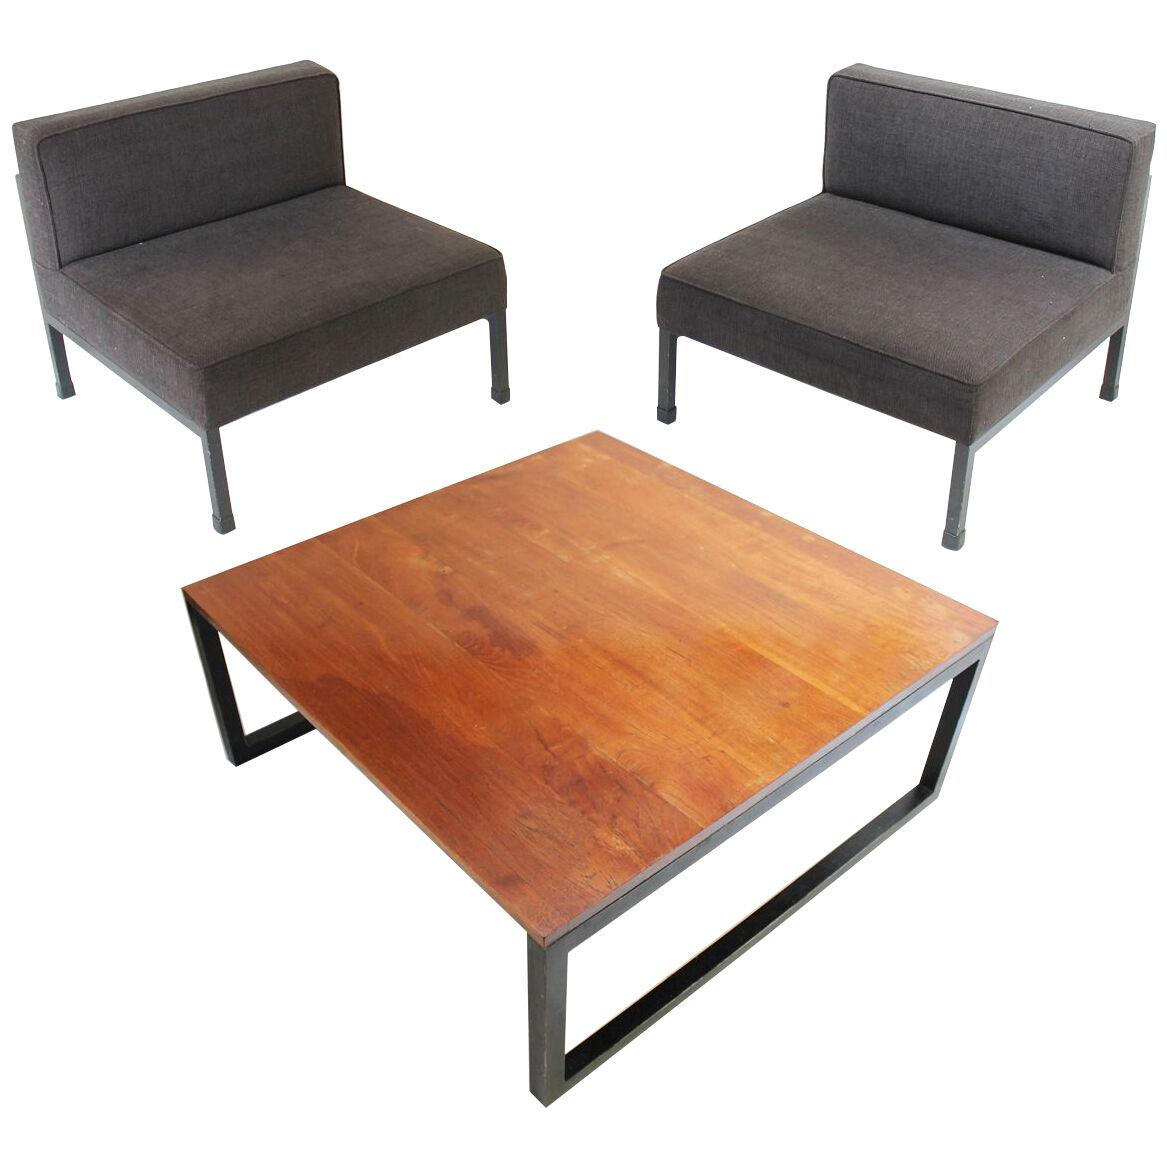 Coffee table and two (2) Armchairs by Wim den Boon, Netherlands 1958